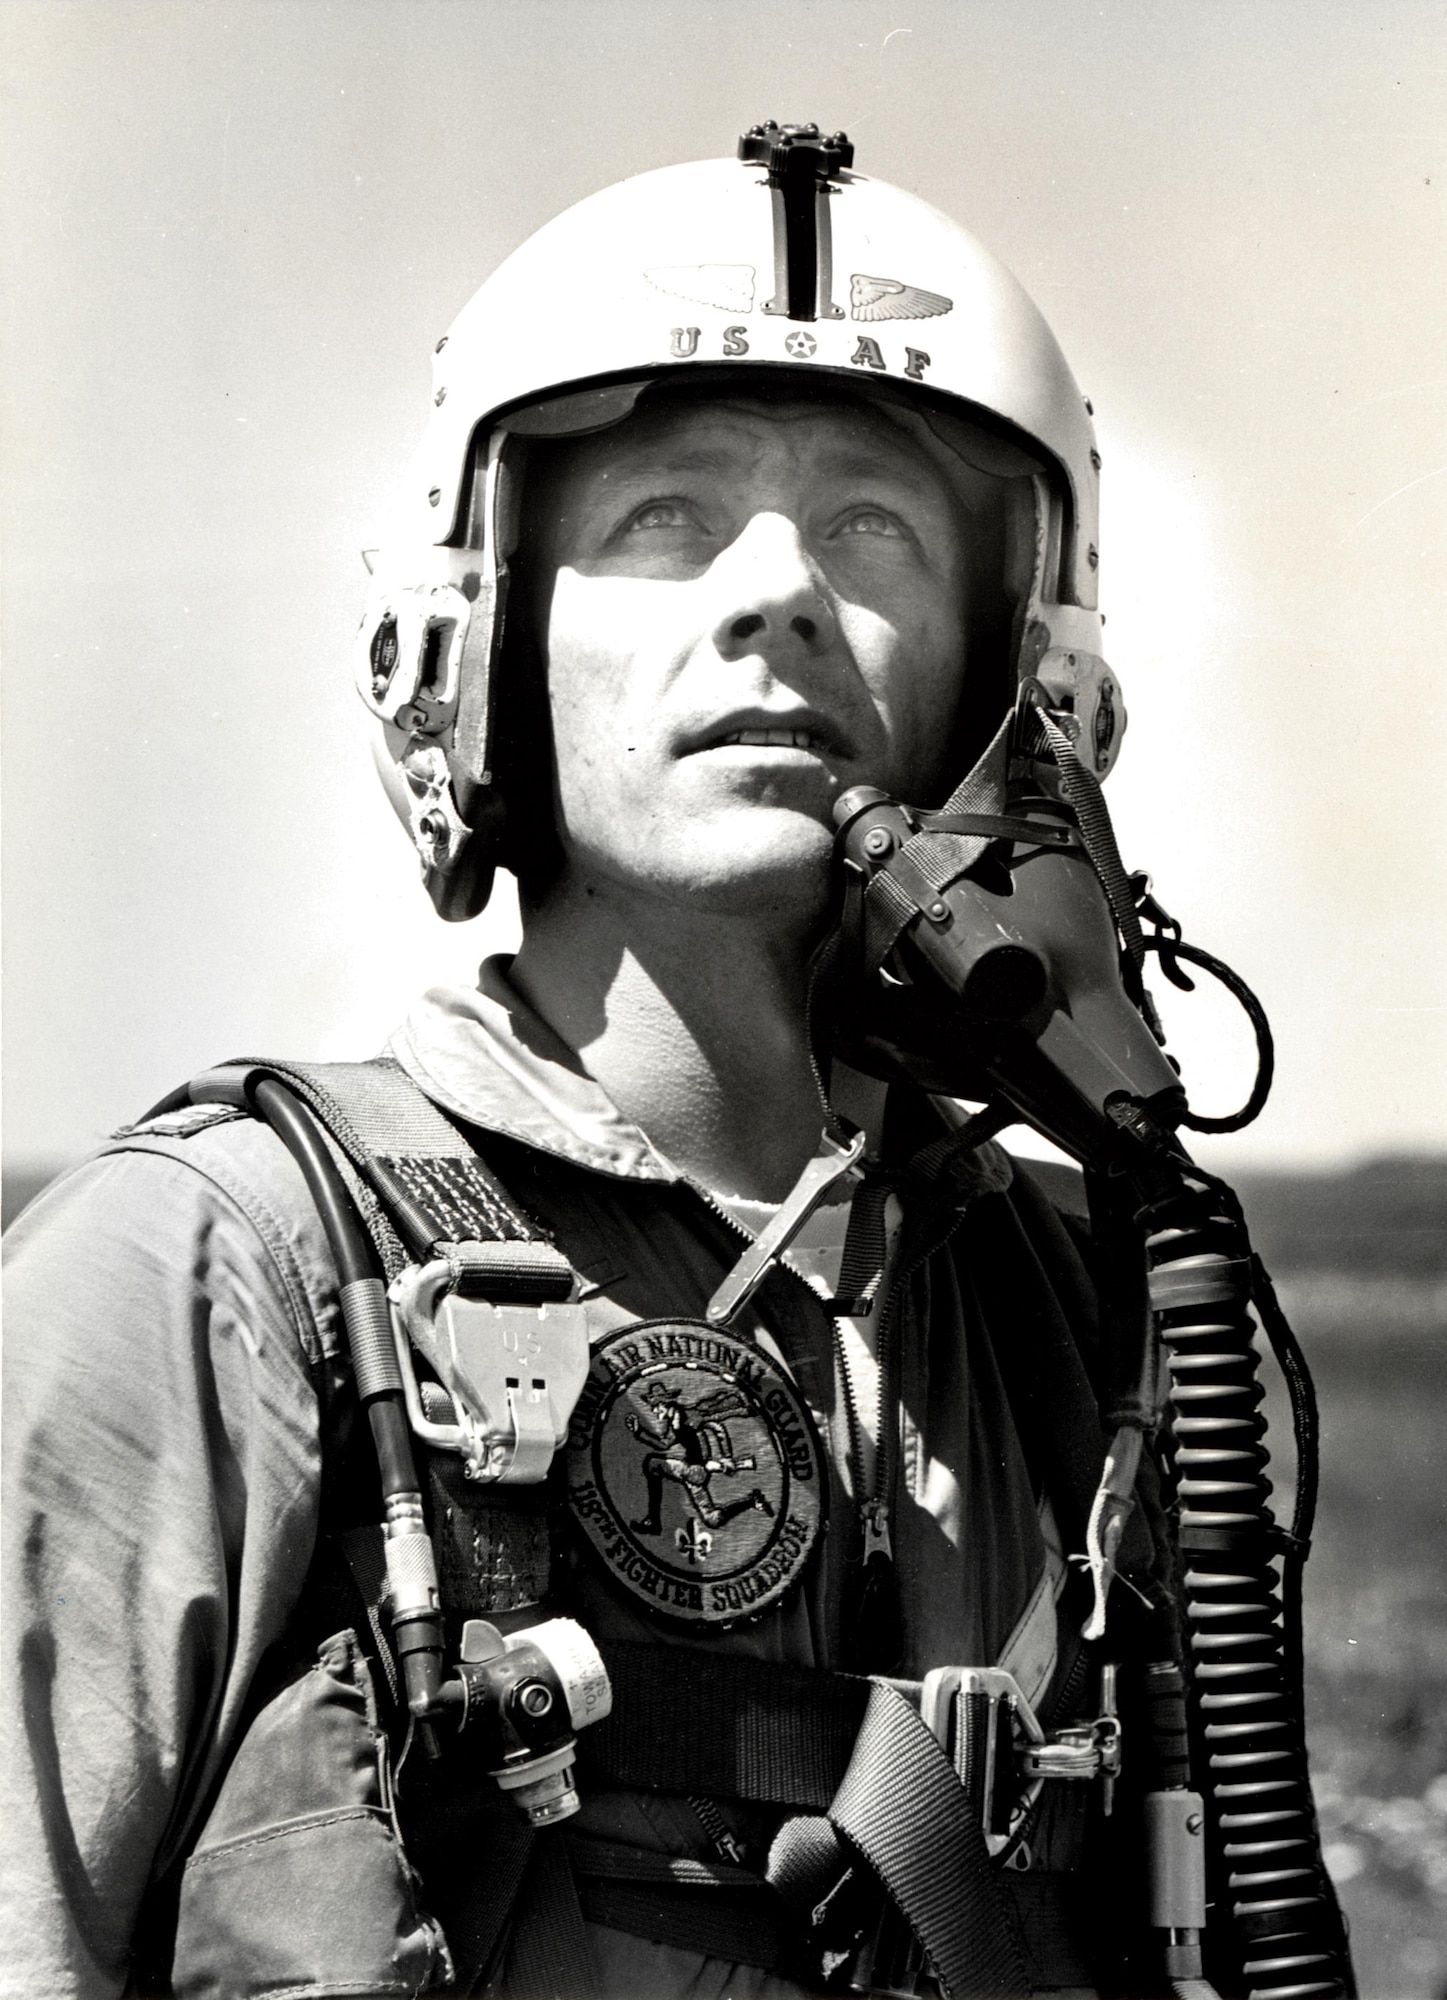 The late John L. Swigert Jr. in his flight suite adorned with a 118th Fighter Squadron patch, circa 1965. (U.S. Air National Guard file photo)